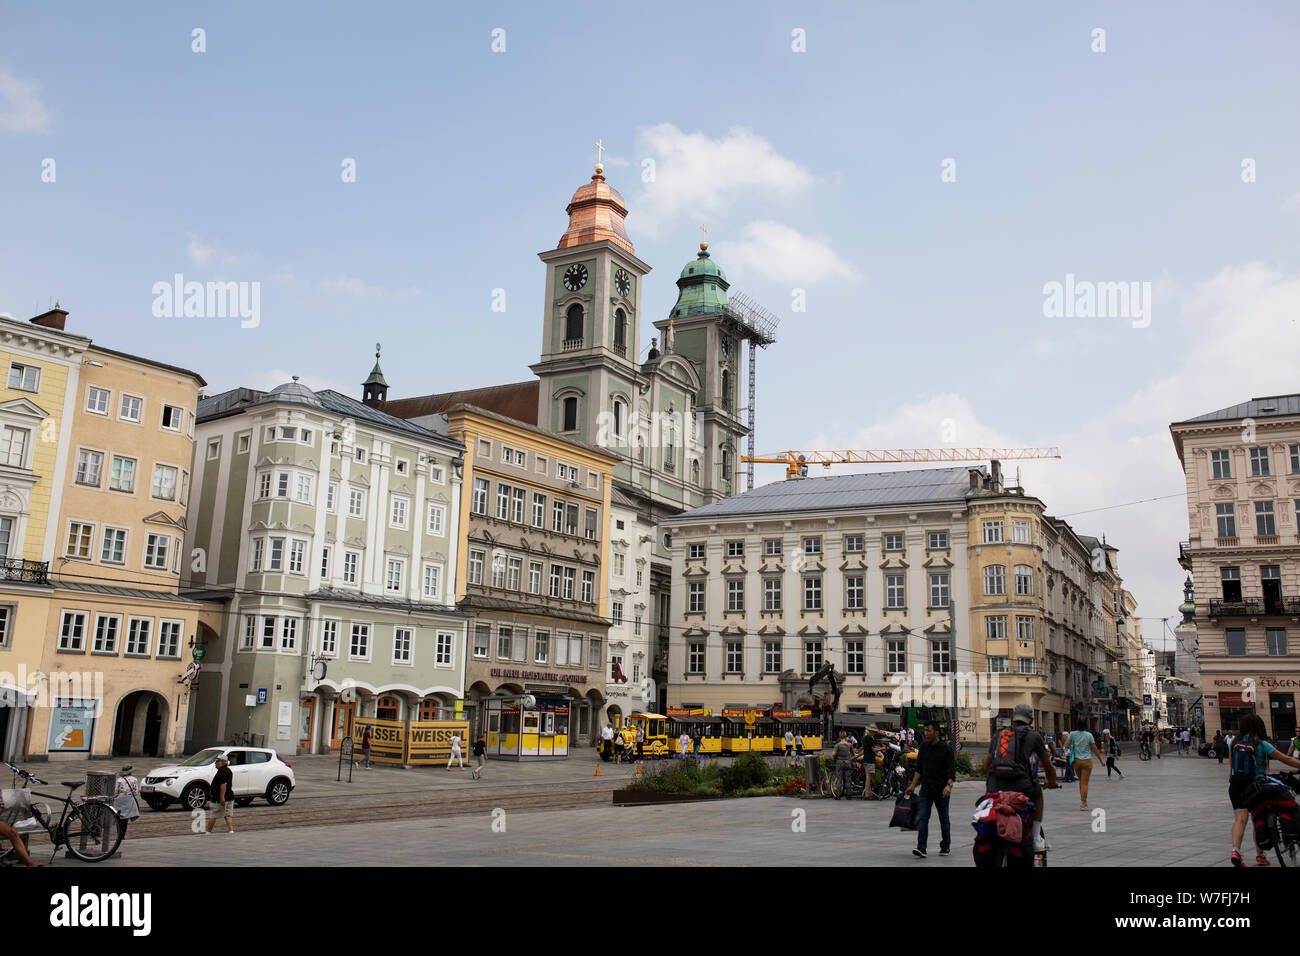 The Hauptplatz (main square) with its shops and restaurants and the old cathedral (St Ignatius) in Linz, Austria. Stock Photo